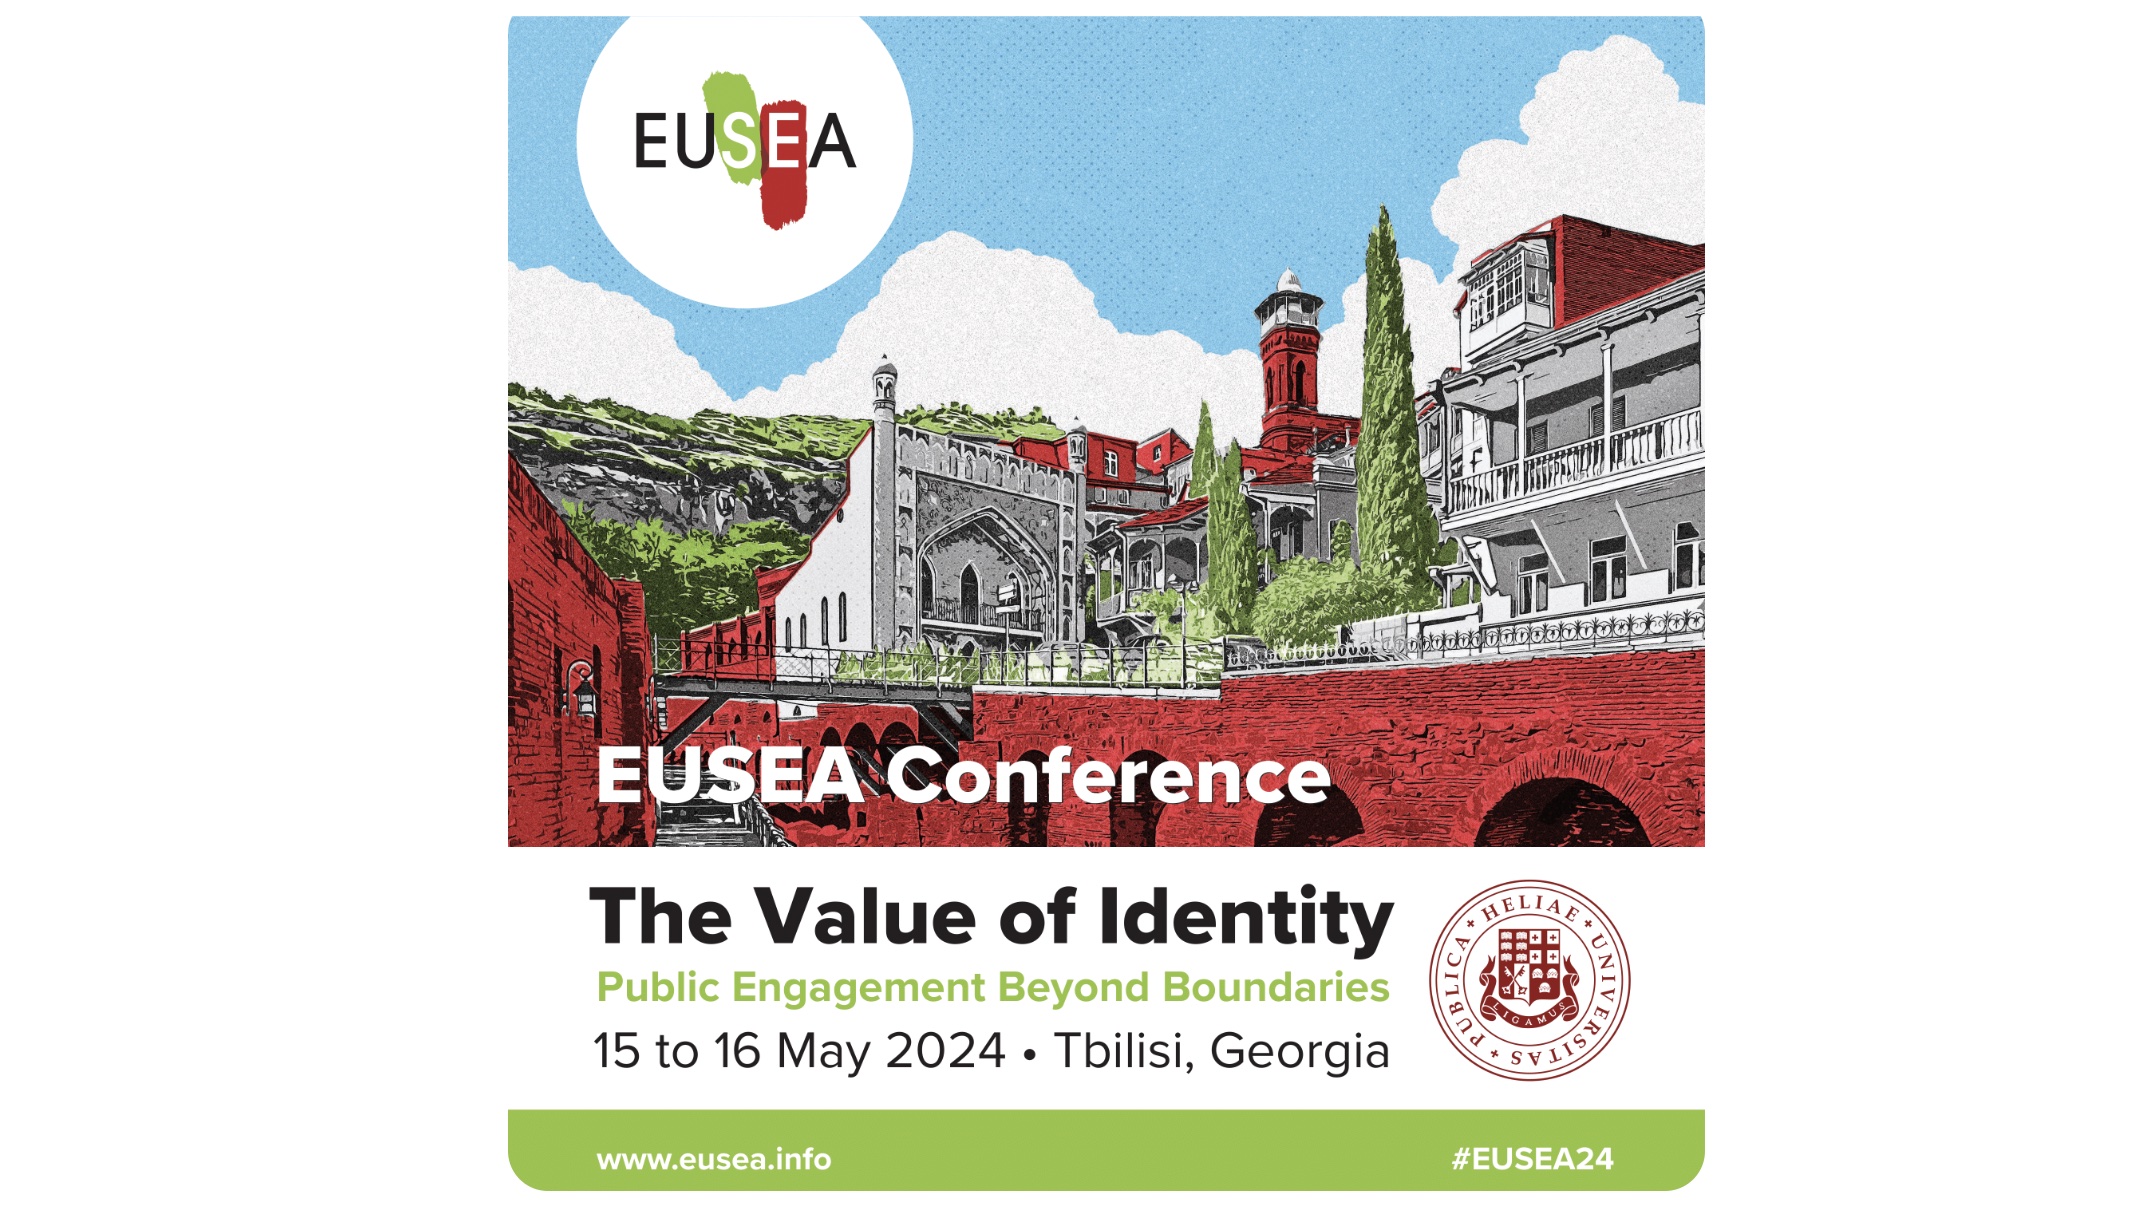 Join us in Tbilisi for #EUSEA24